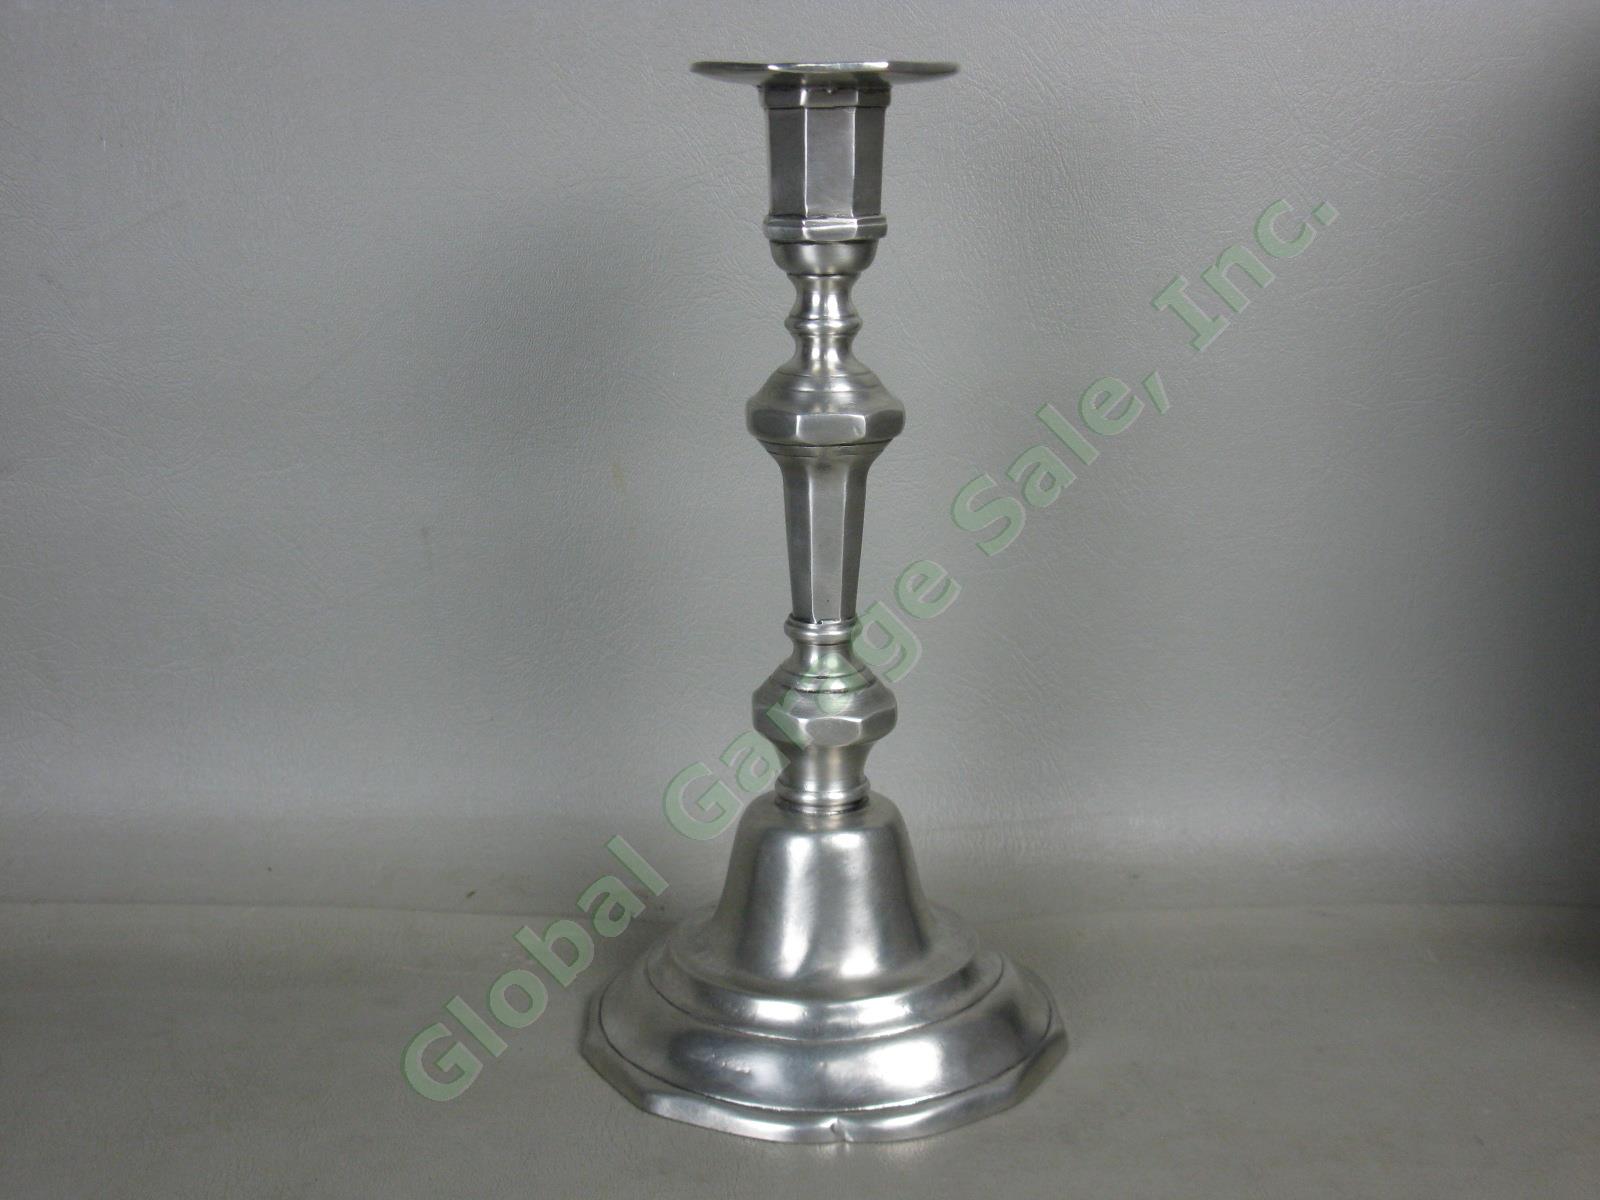 NEW Match Pewter Genoa Candlestick 9.75" Made In Italy $220 Retail No Reserve! 1